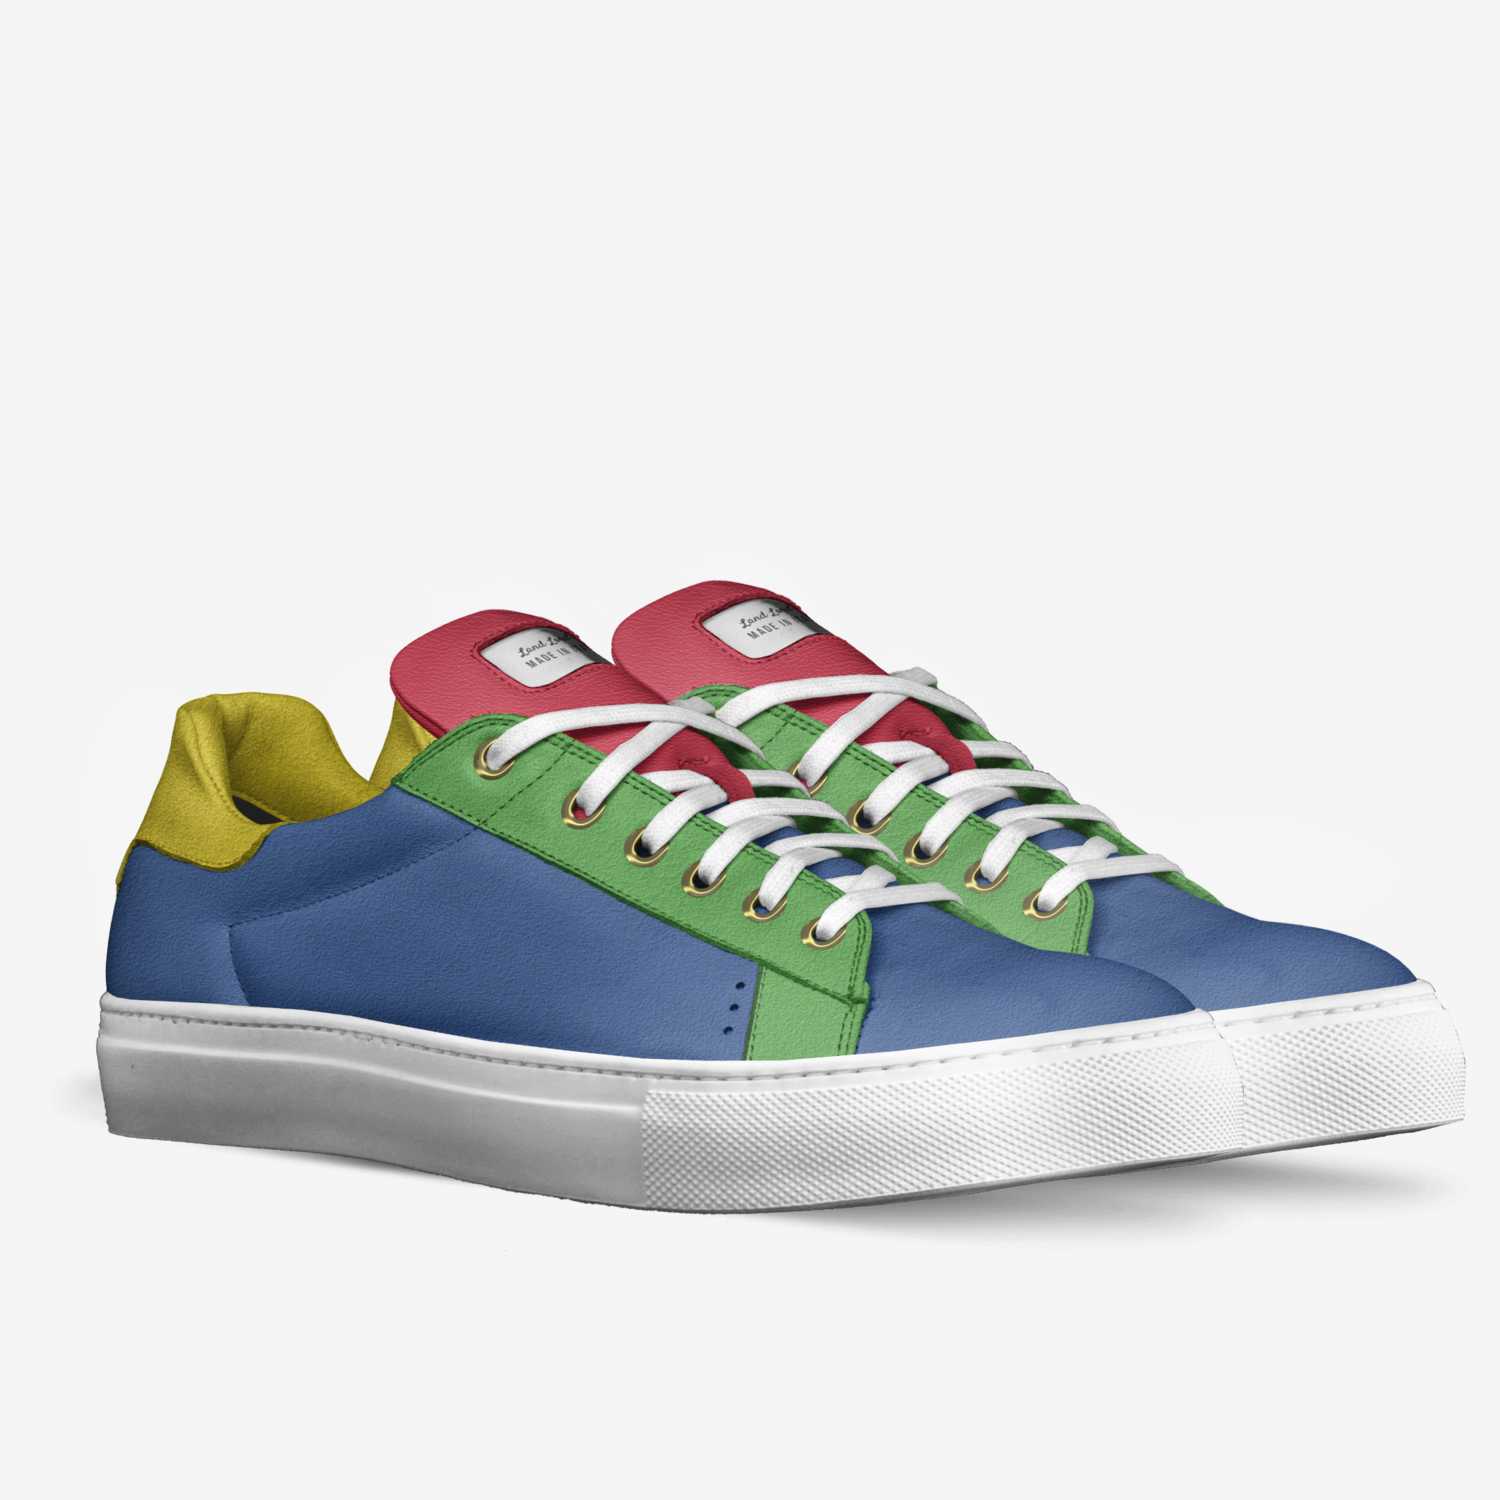 Landlords | A Custom Shoe concept by Damion Bell